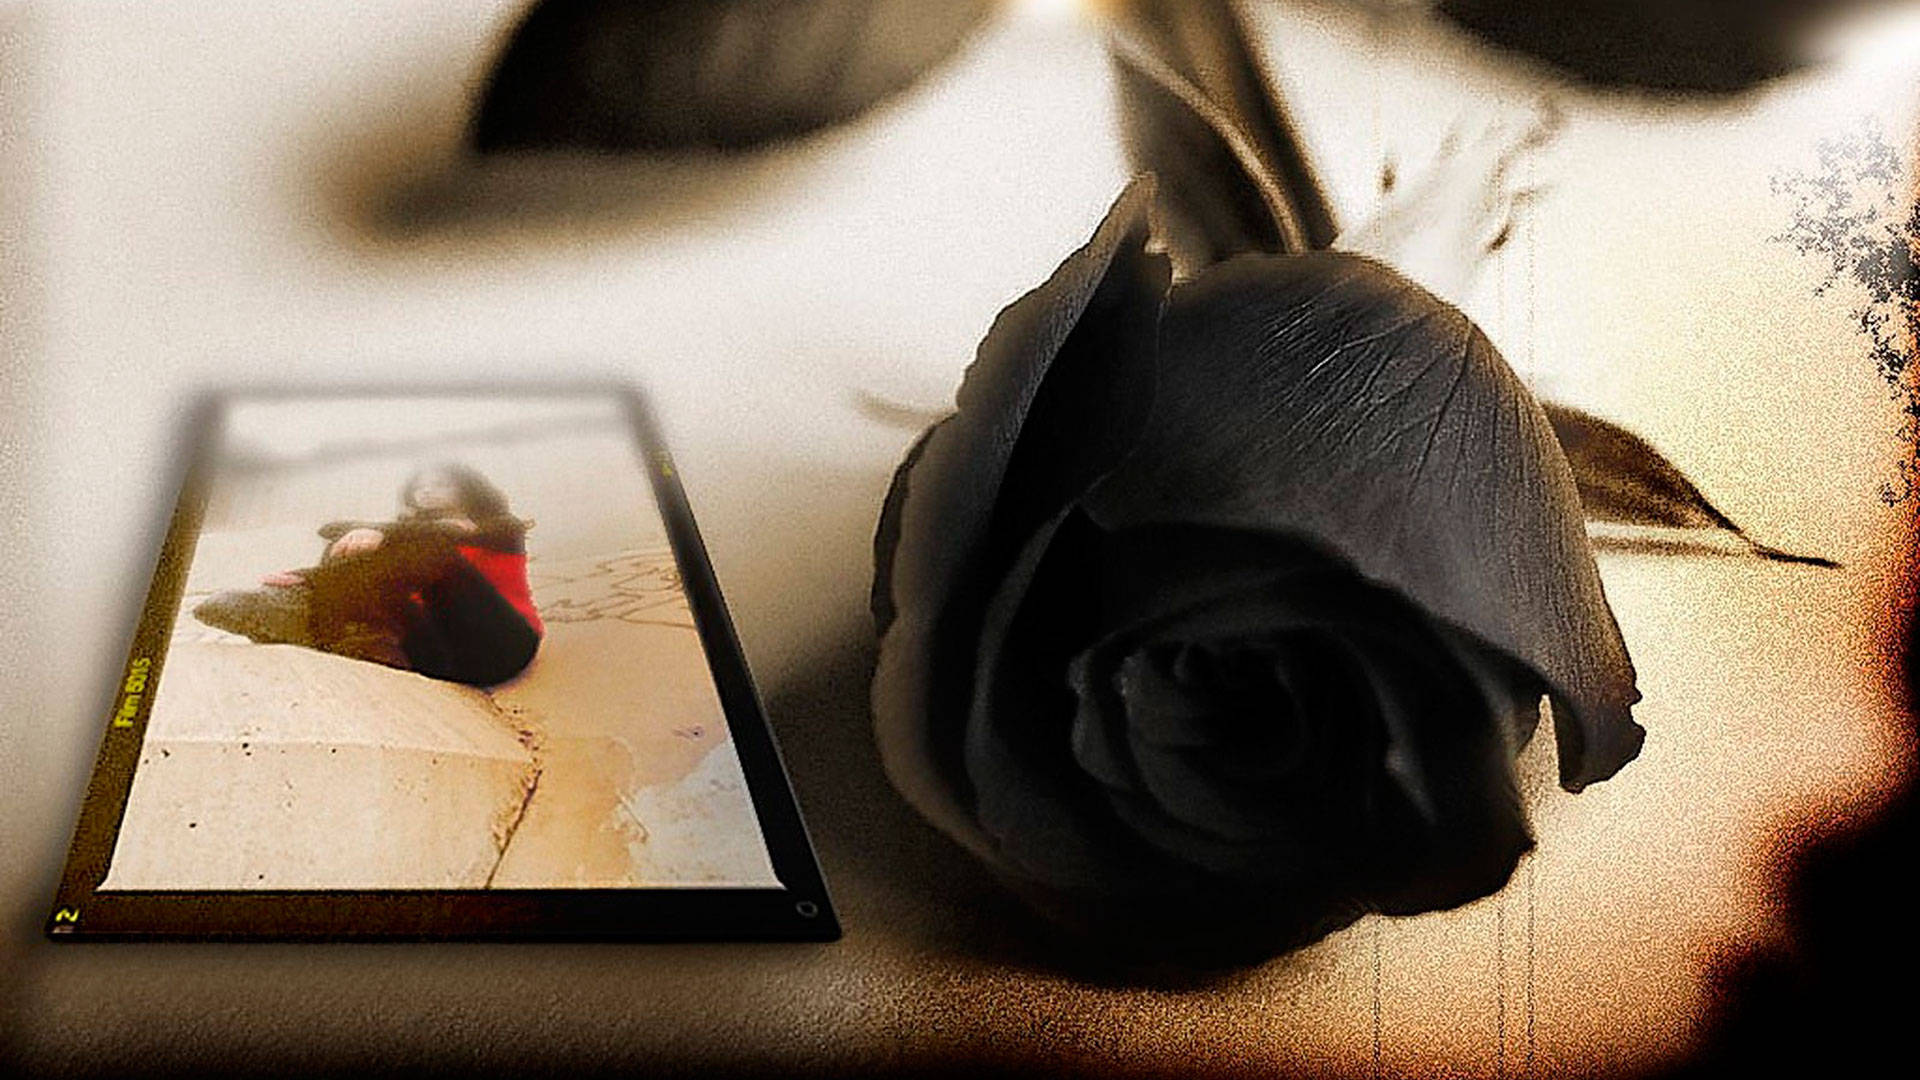 Black Rose And Photograph Background